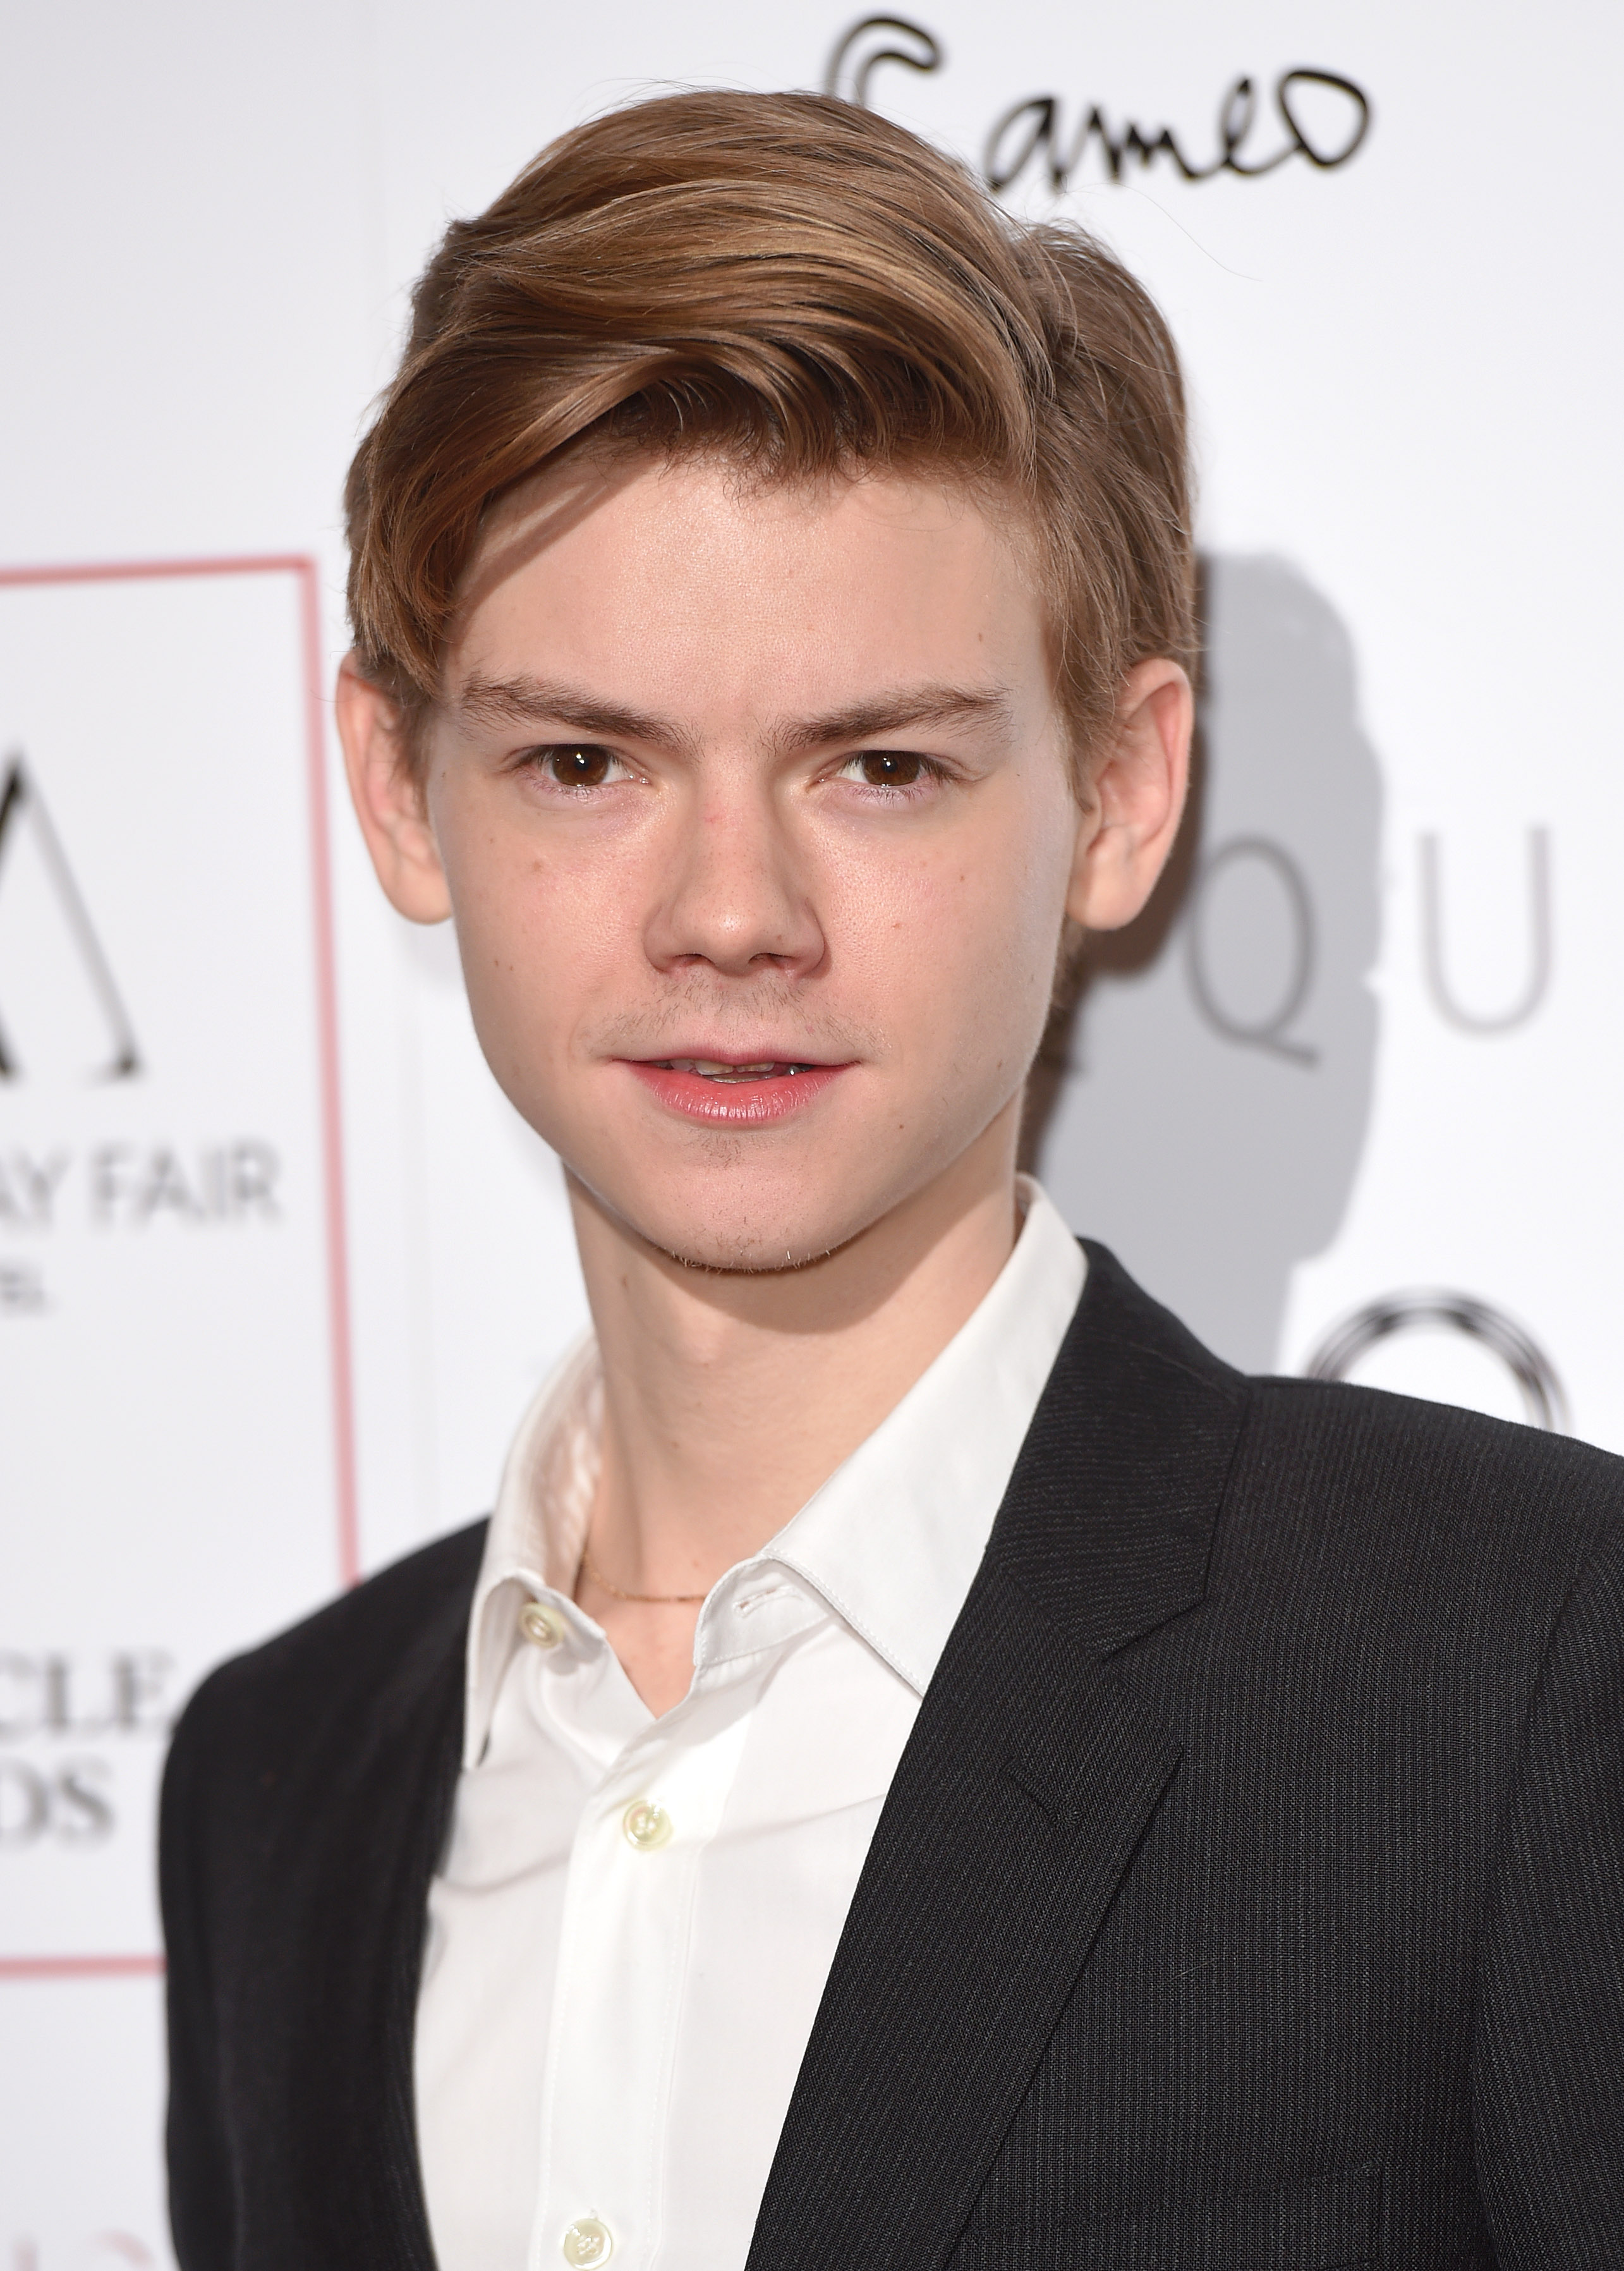 Thomas Brodie-Sangster attends The London Critics' Circle Film Awards on January 17, 2016 in London, England | Source: Getty Images